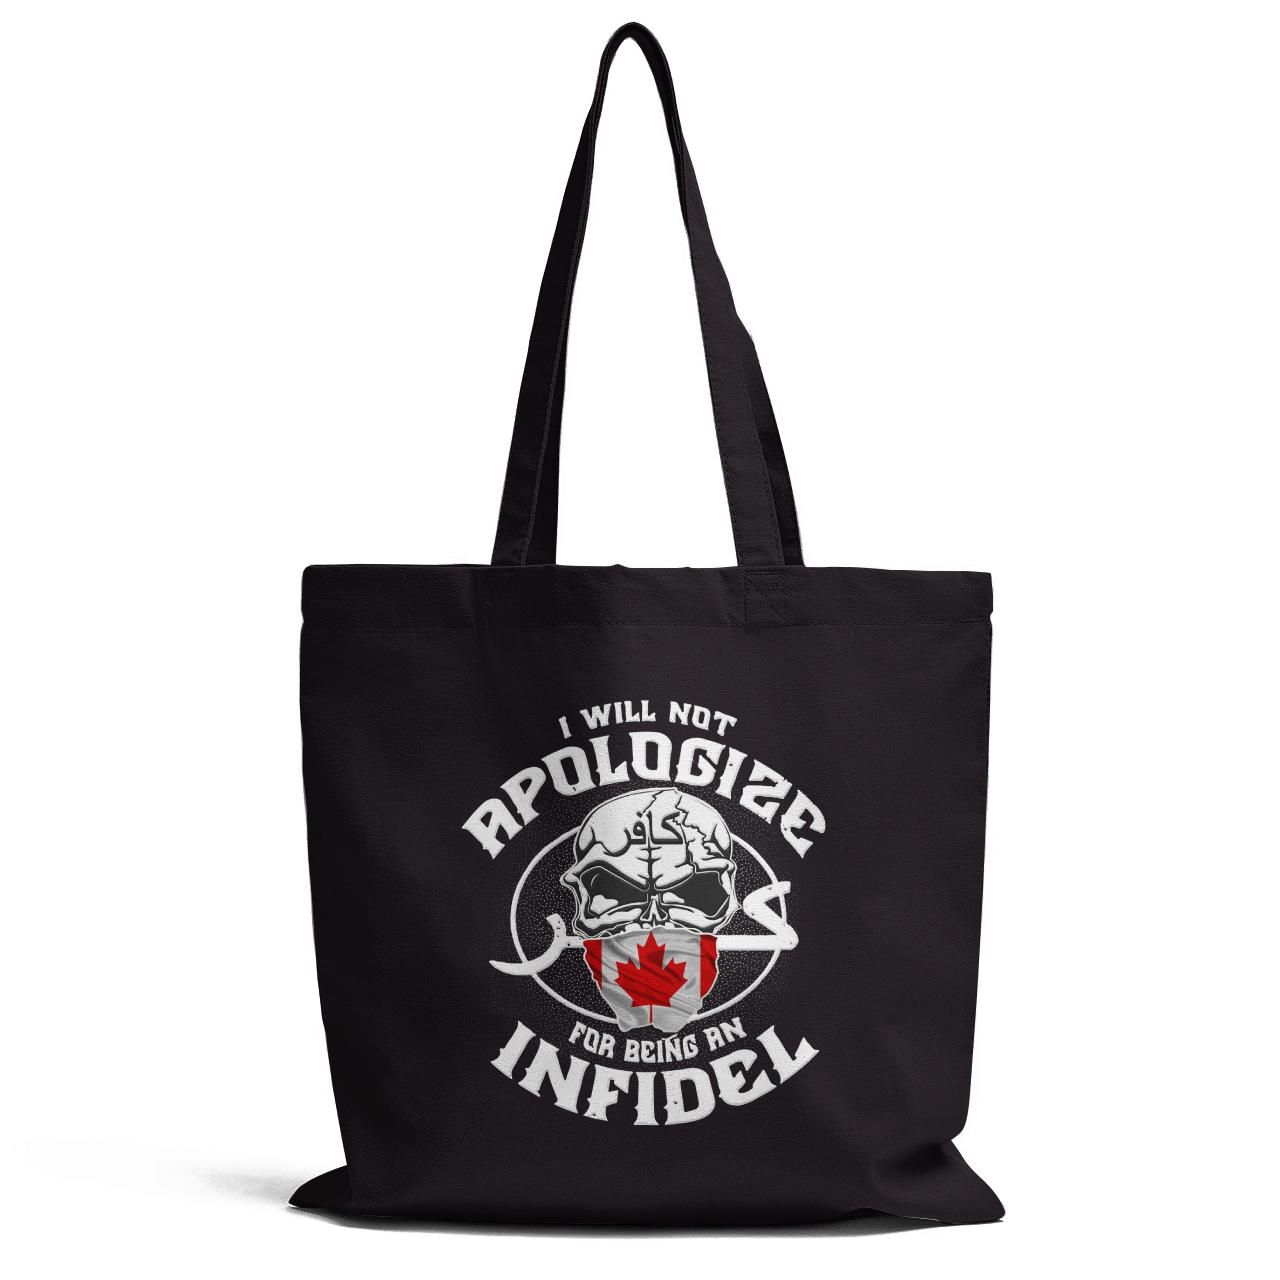 I Will Not Apolosize For Being An Infidel Tote Bag